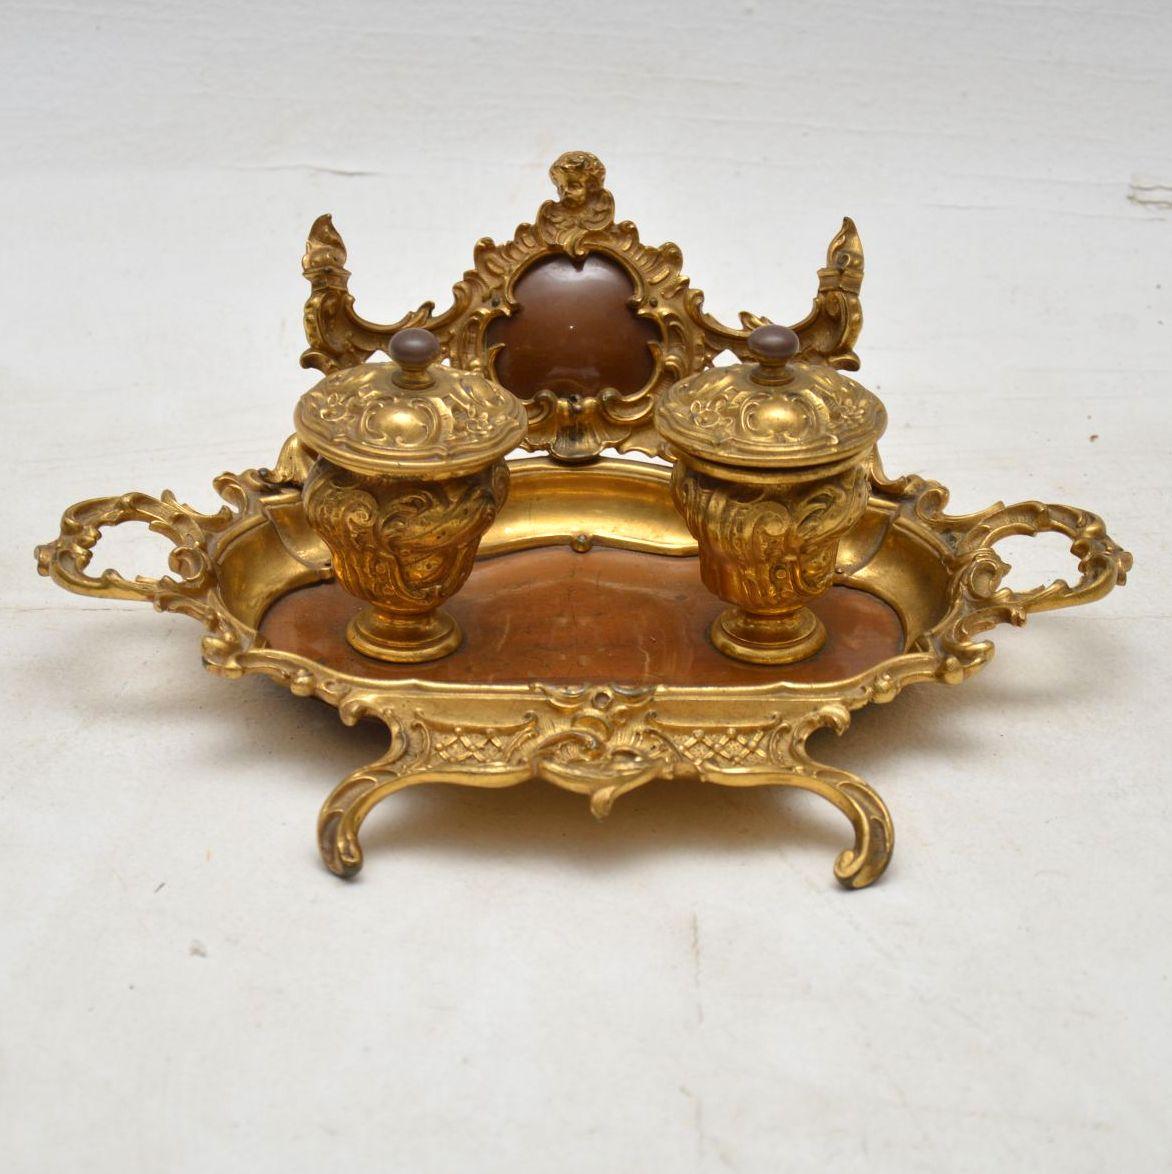 This French antique gilt bronze and polished wood inkwell stand has beautiful decoration all-over and has some lovely features. Please enlarge all the images to see all the fine details. I would date this piece to circa 1860s-1880s period and it’s